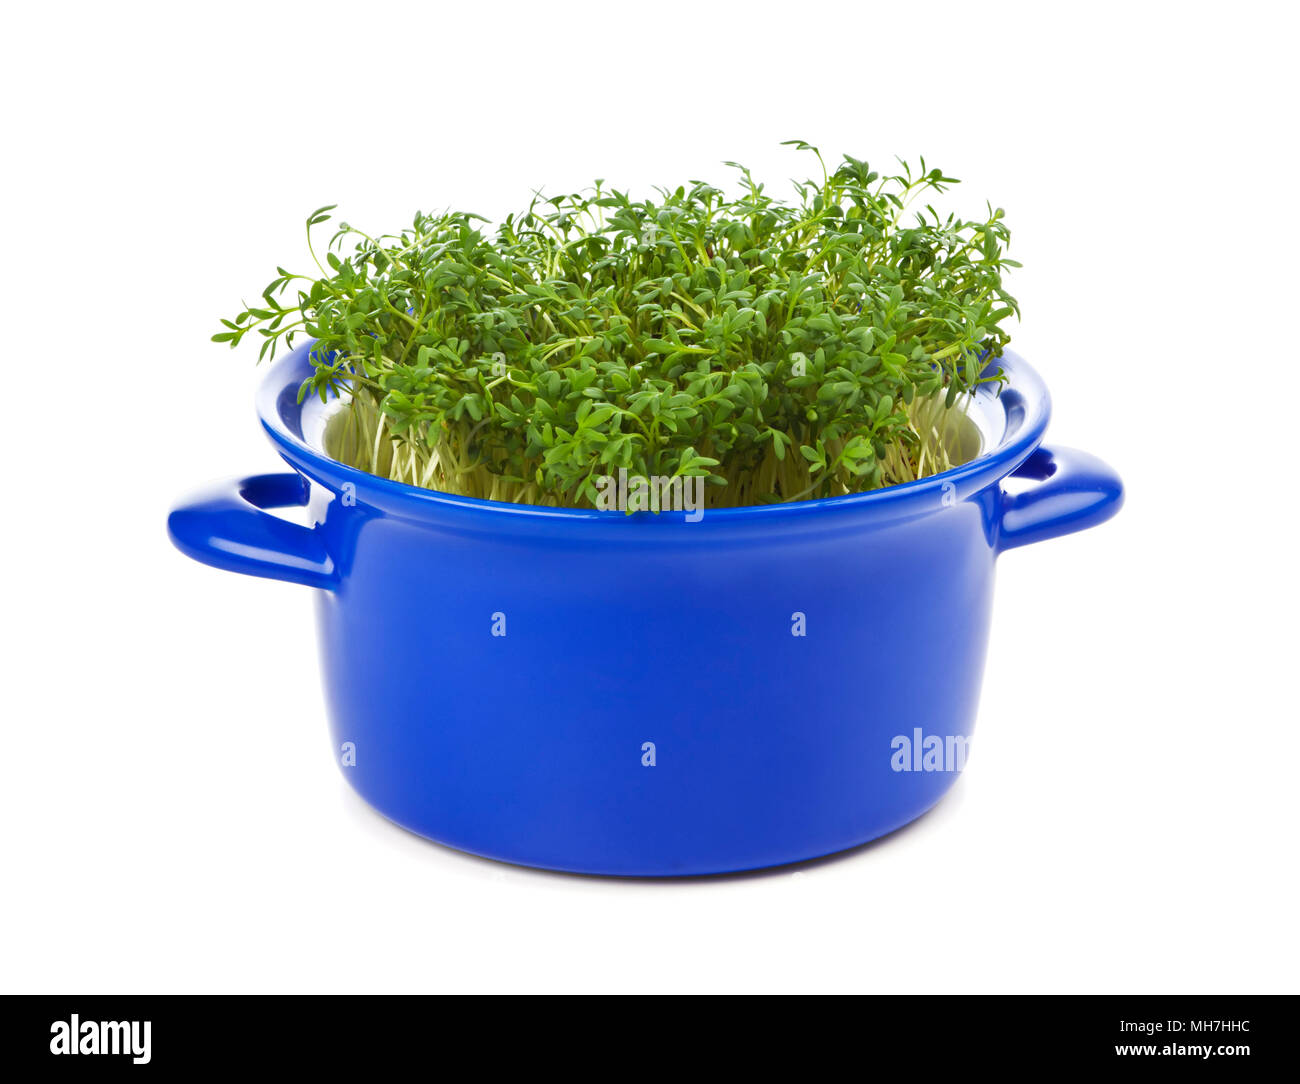 Garden Cress planted into a blue casserole, isolated on white background Stock Photo